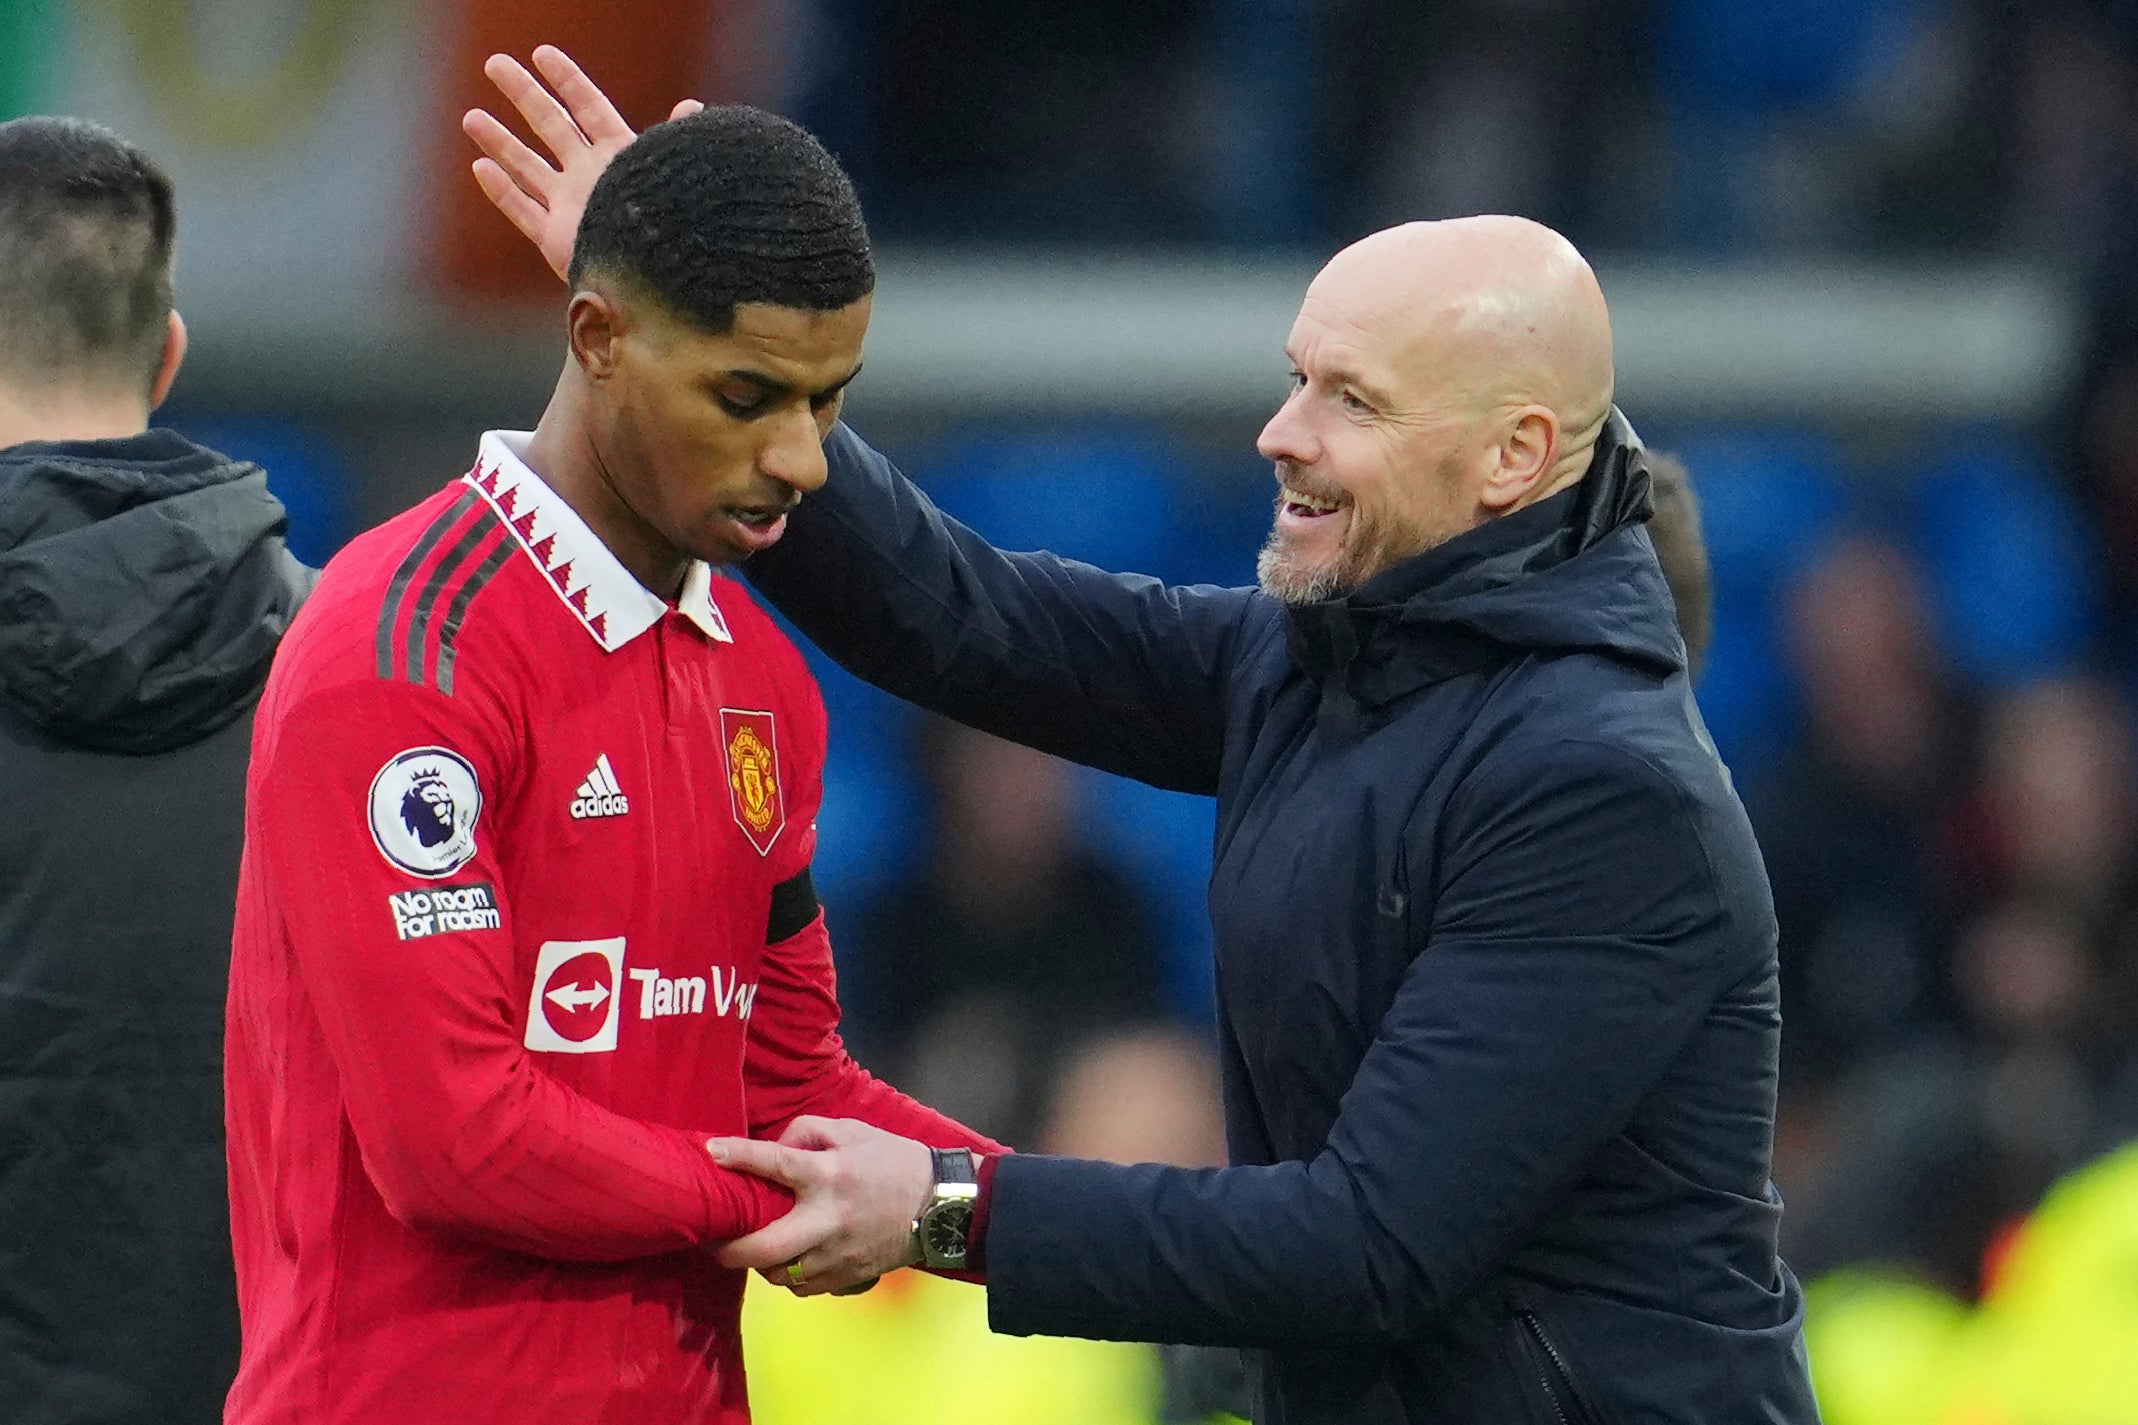 Marcus Rashford is congratulated by his manager after beating Leeds